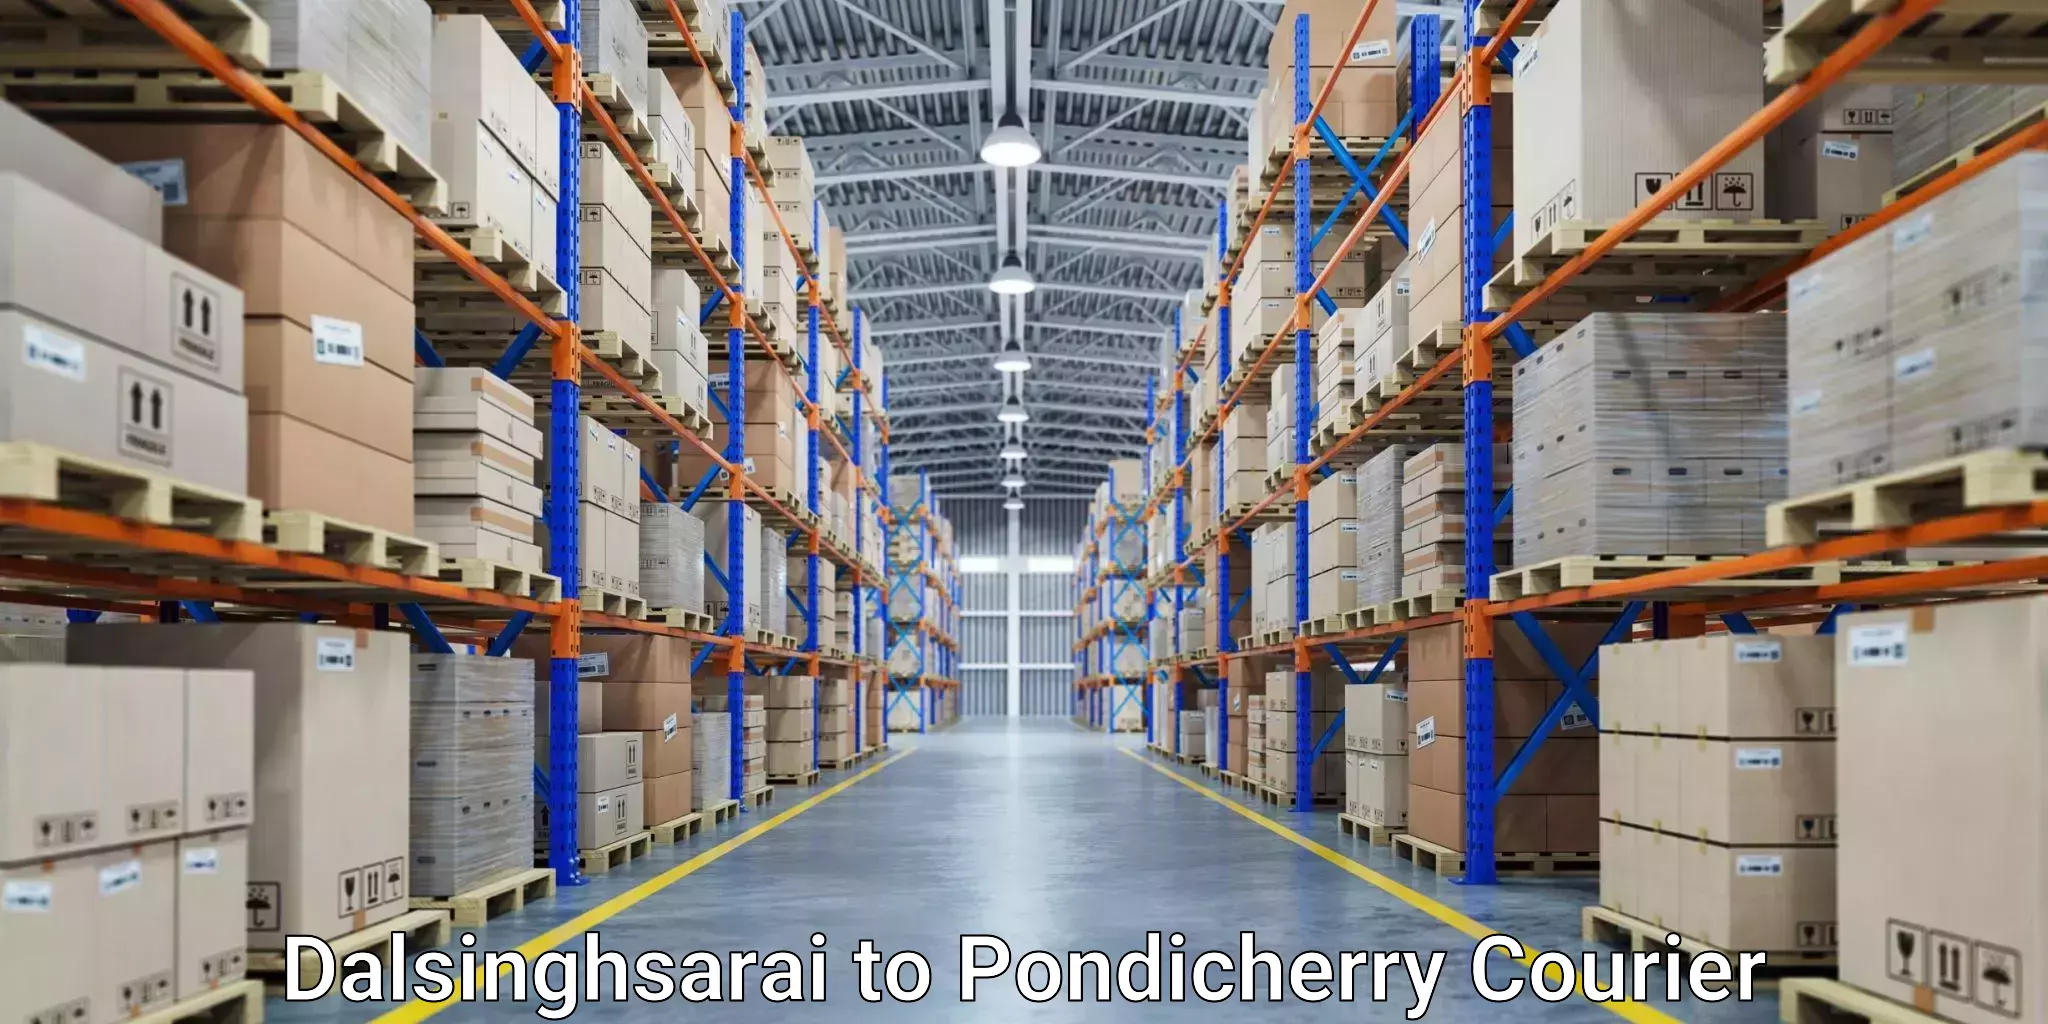 Medical delivery services Dalsinghsarai to Pondicherry